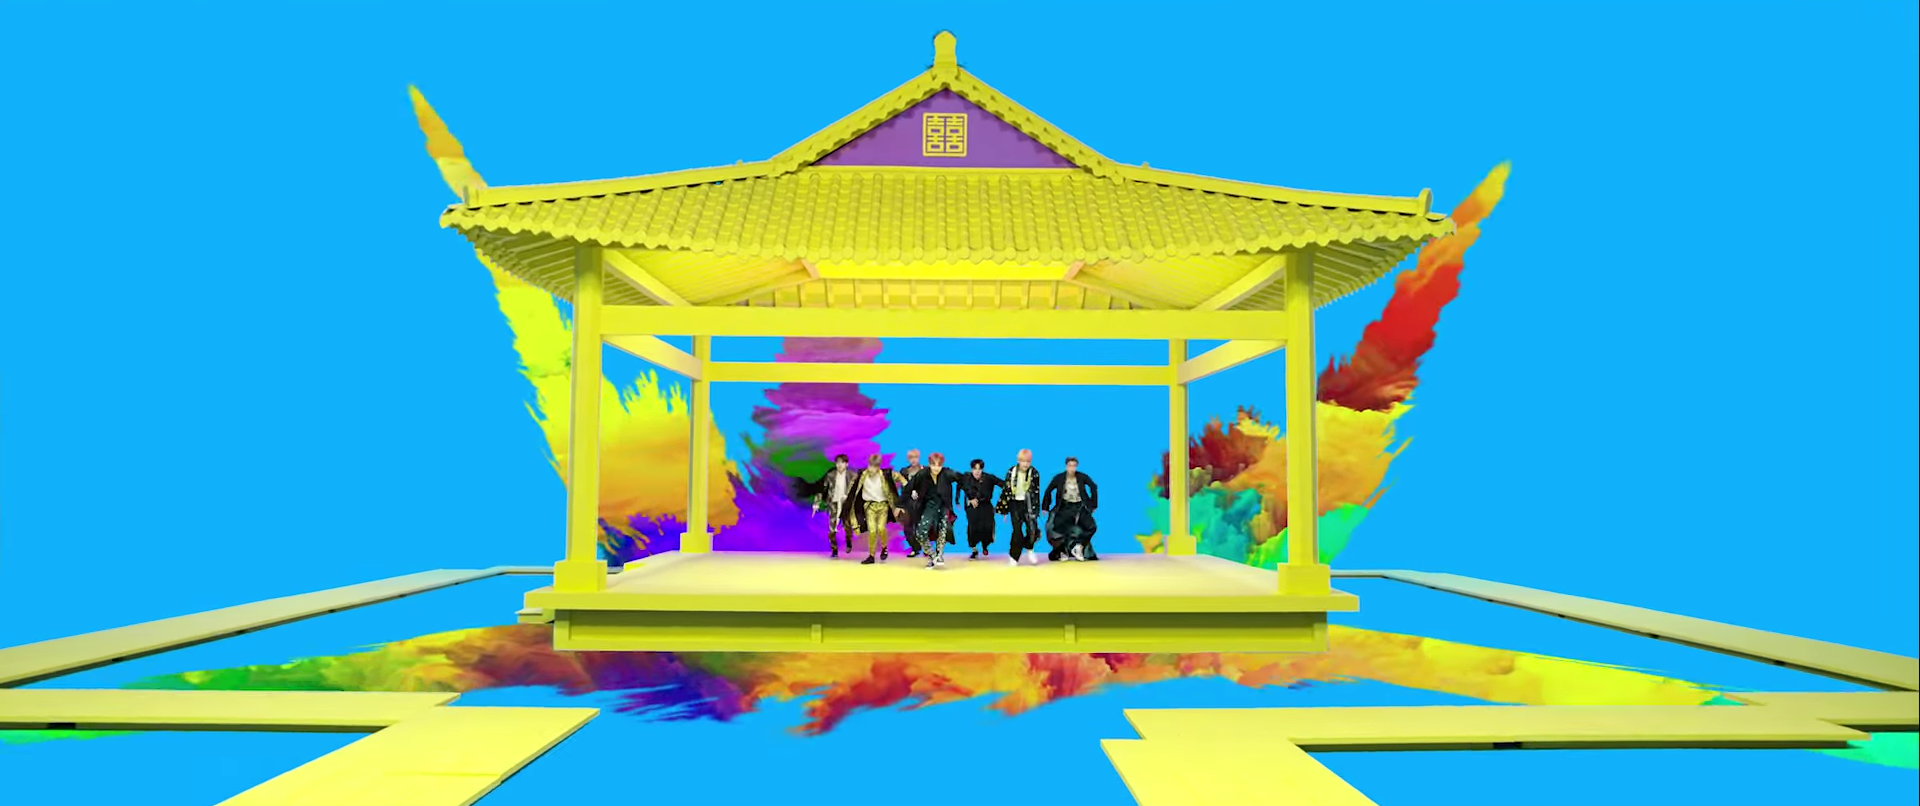 Bts Fuse Traditional With Innovative In Idol Seoulbeats